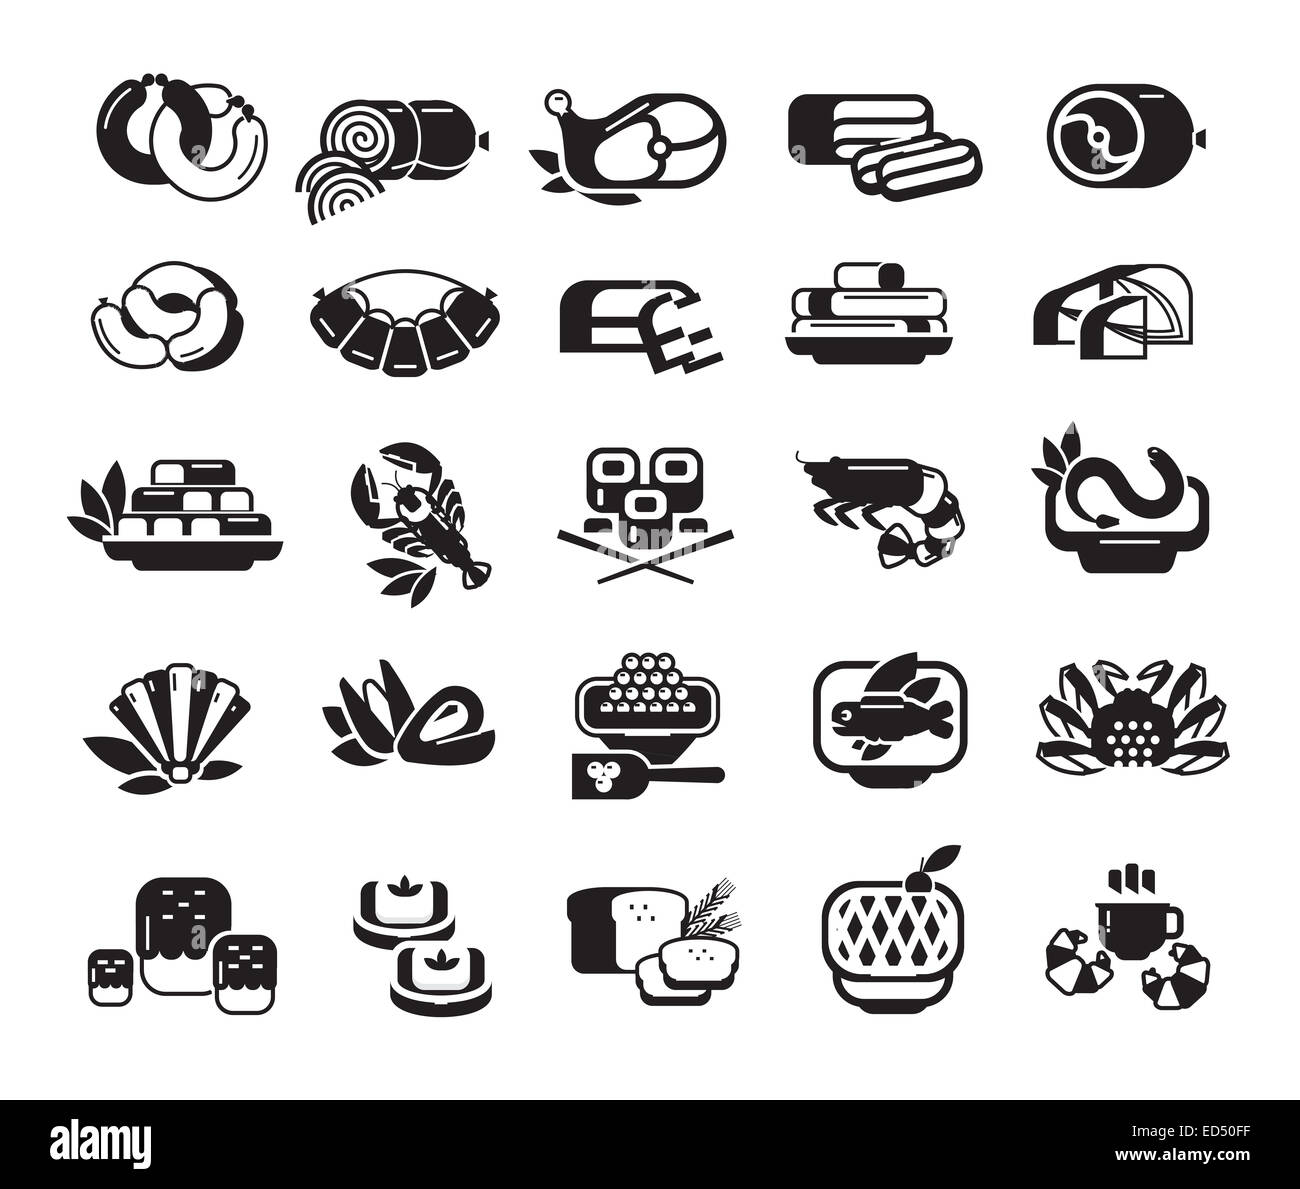 Food. Meat, seafood, baked goods. Set of icons Stock Photo